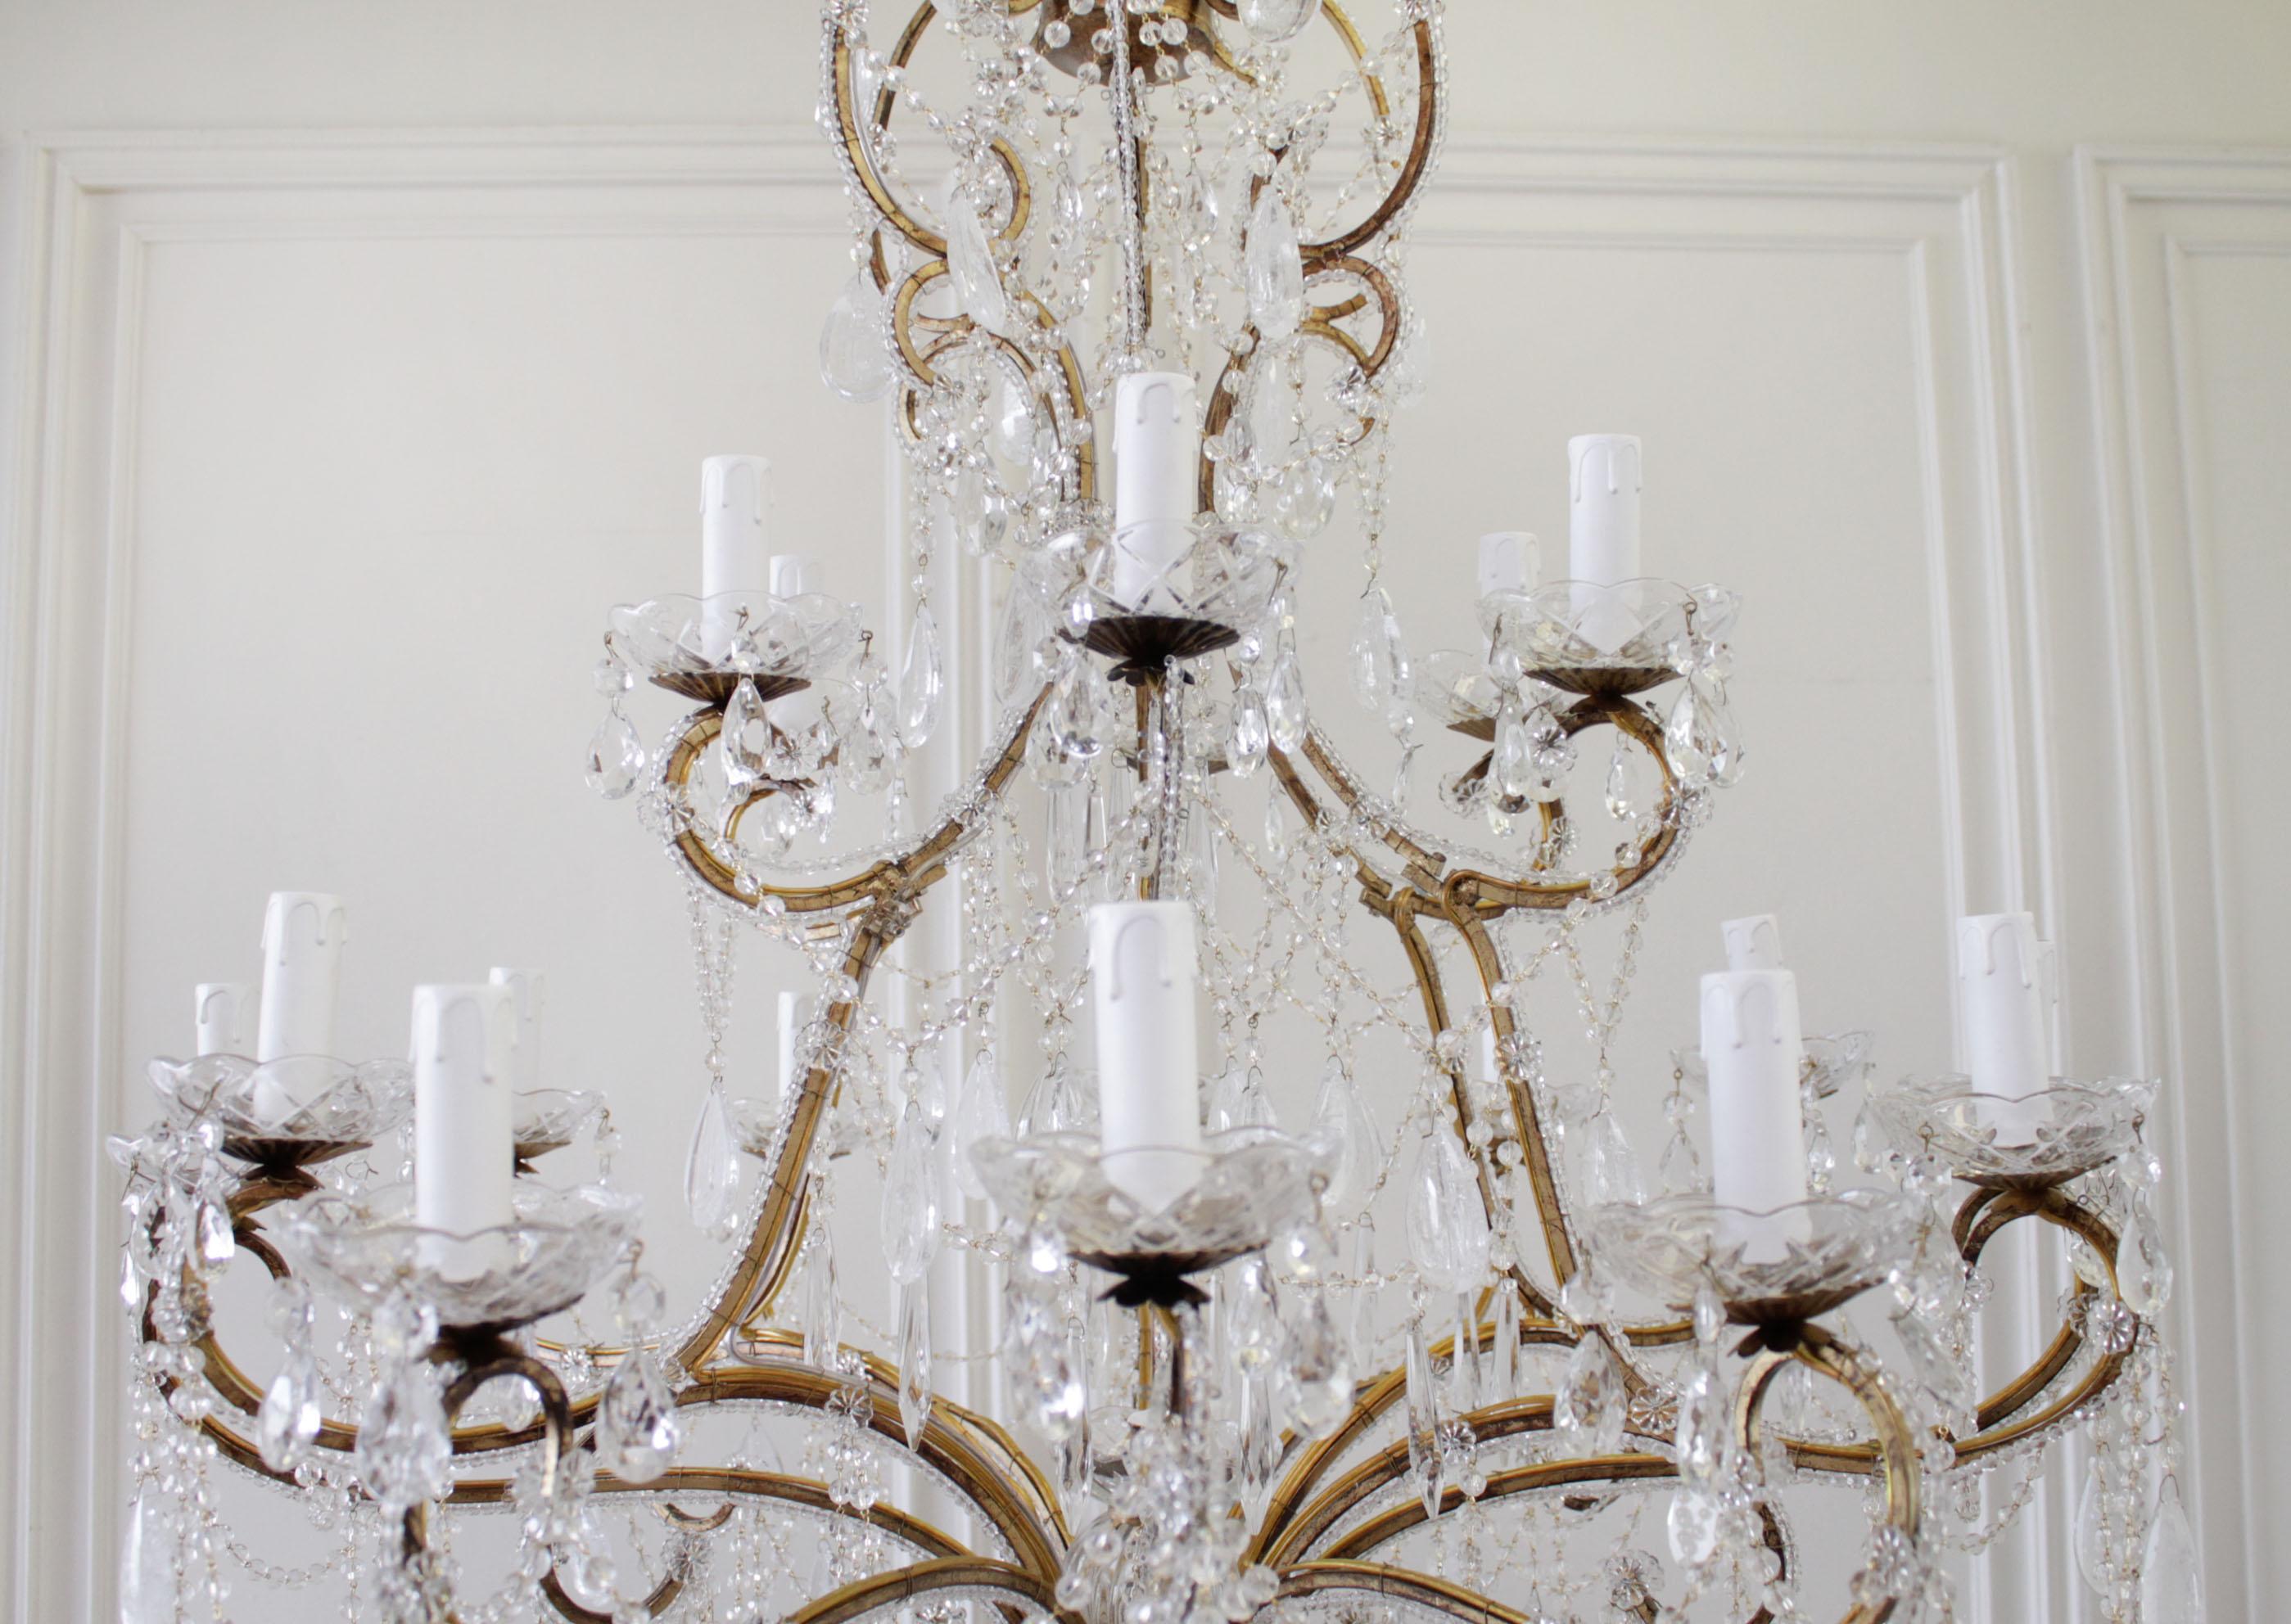 Antique Reproduction Italian Chandelier with Rock Style Crystals In New Condition For Sale In Brea, CA